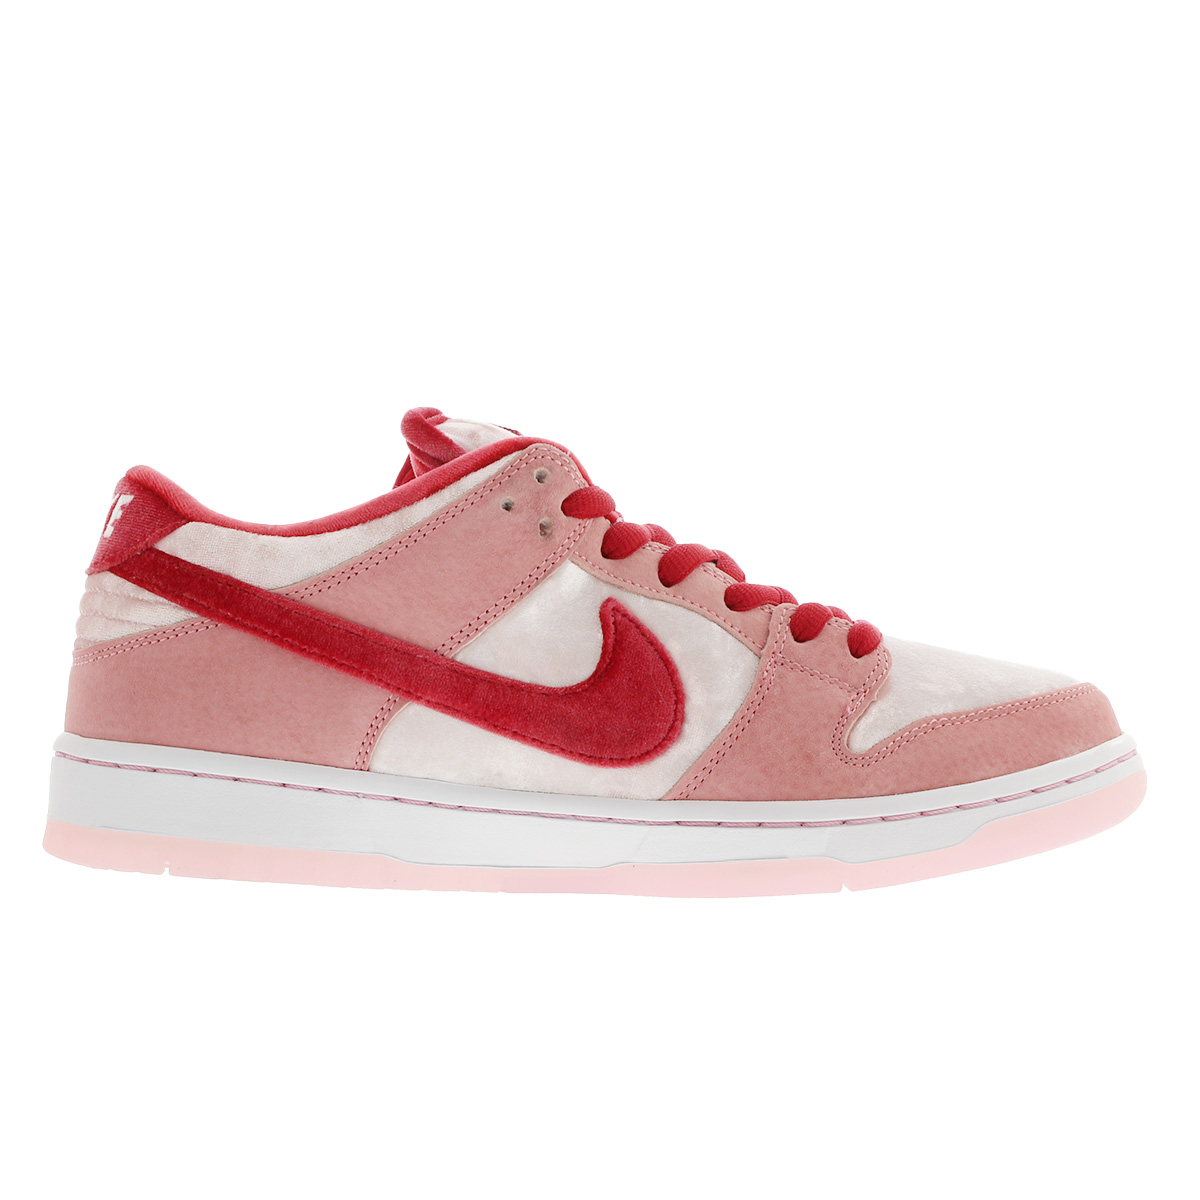 NIKE SB DUNK LOW PRO QS STRANGELOVE 【VALENTINES DAY】 ナイキ SB ダンク ロー プロ QS  BRIGHT PINK/GYM RED/MED SOFT PINK ct2552-800 | SELECT SHOP LOWTEX